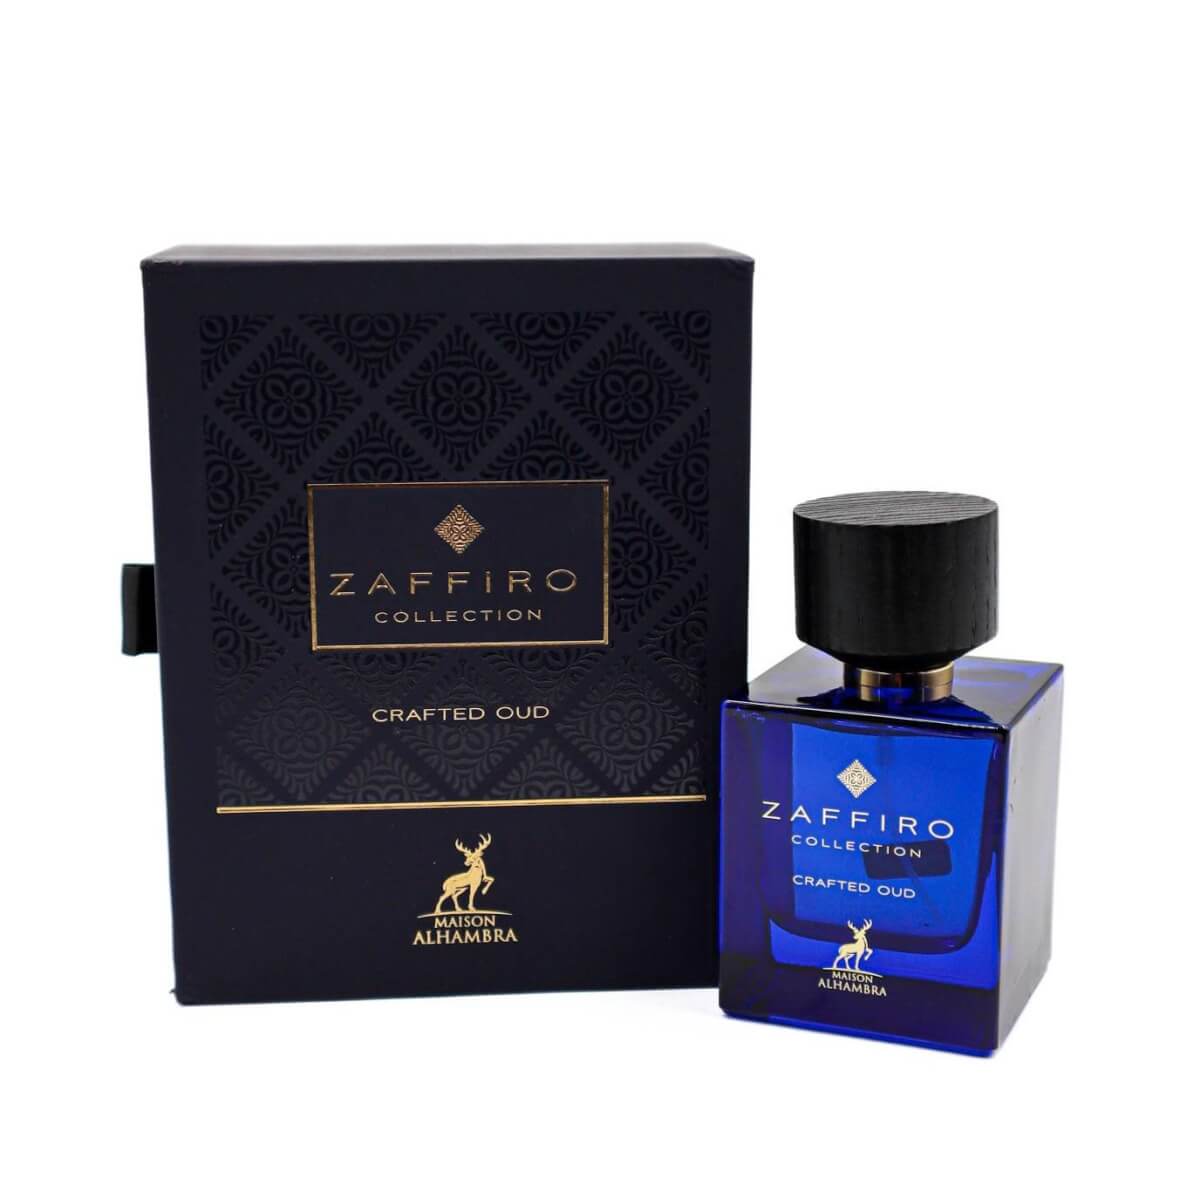 Zaffiro Collection Crafted Oud Perfume / Eau De Parfum 100Ml By Maison Alhambra / Lattafa (Inspired By Thameen Carved Oud)